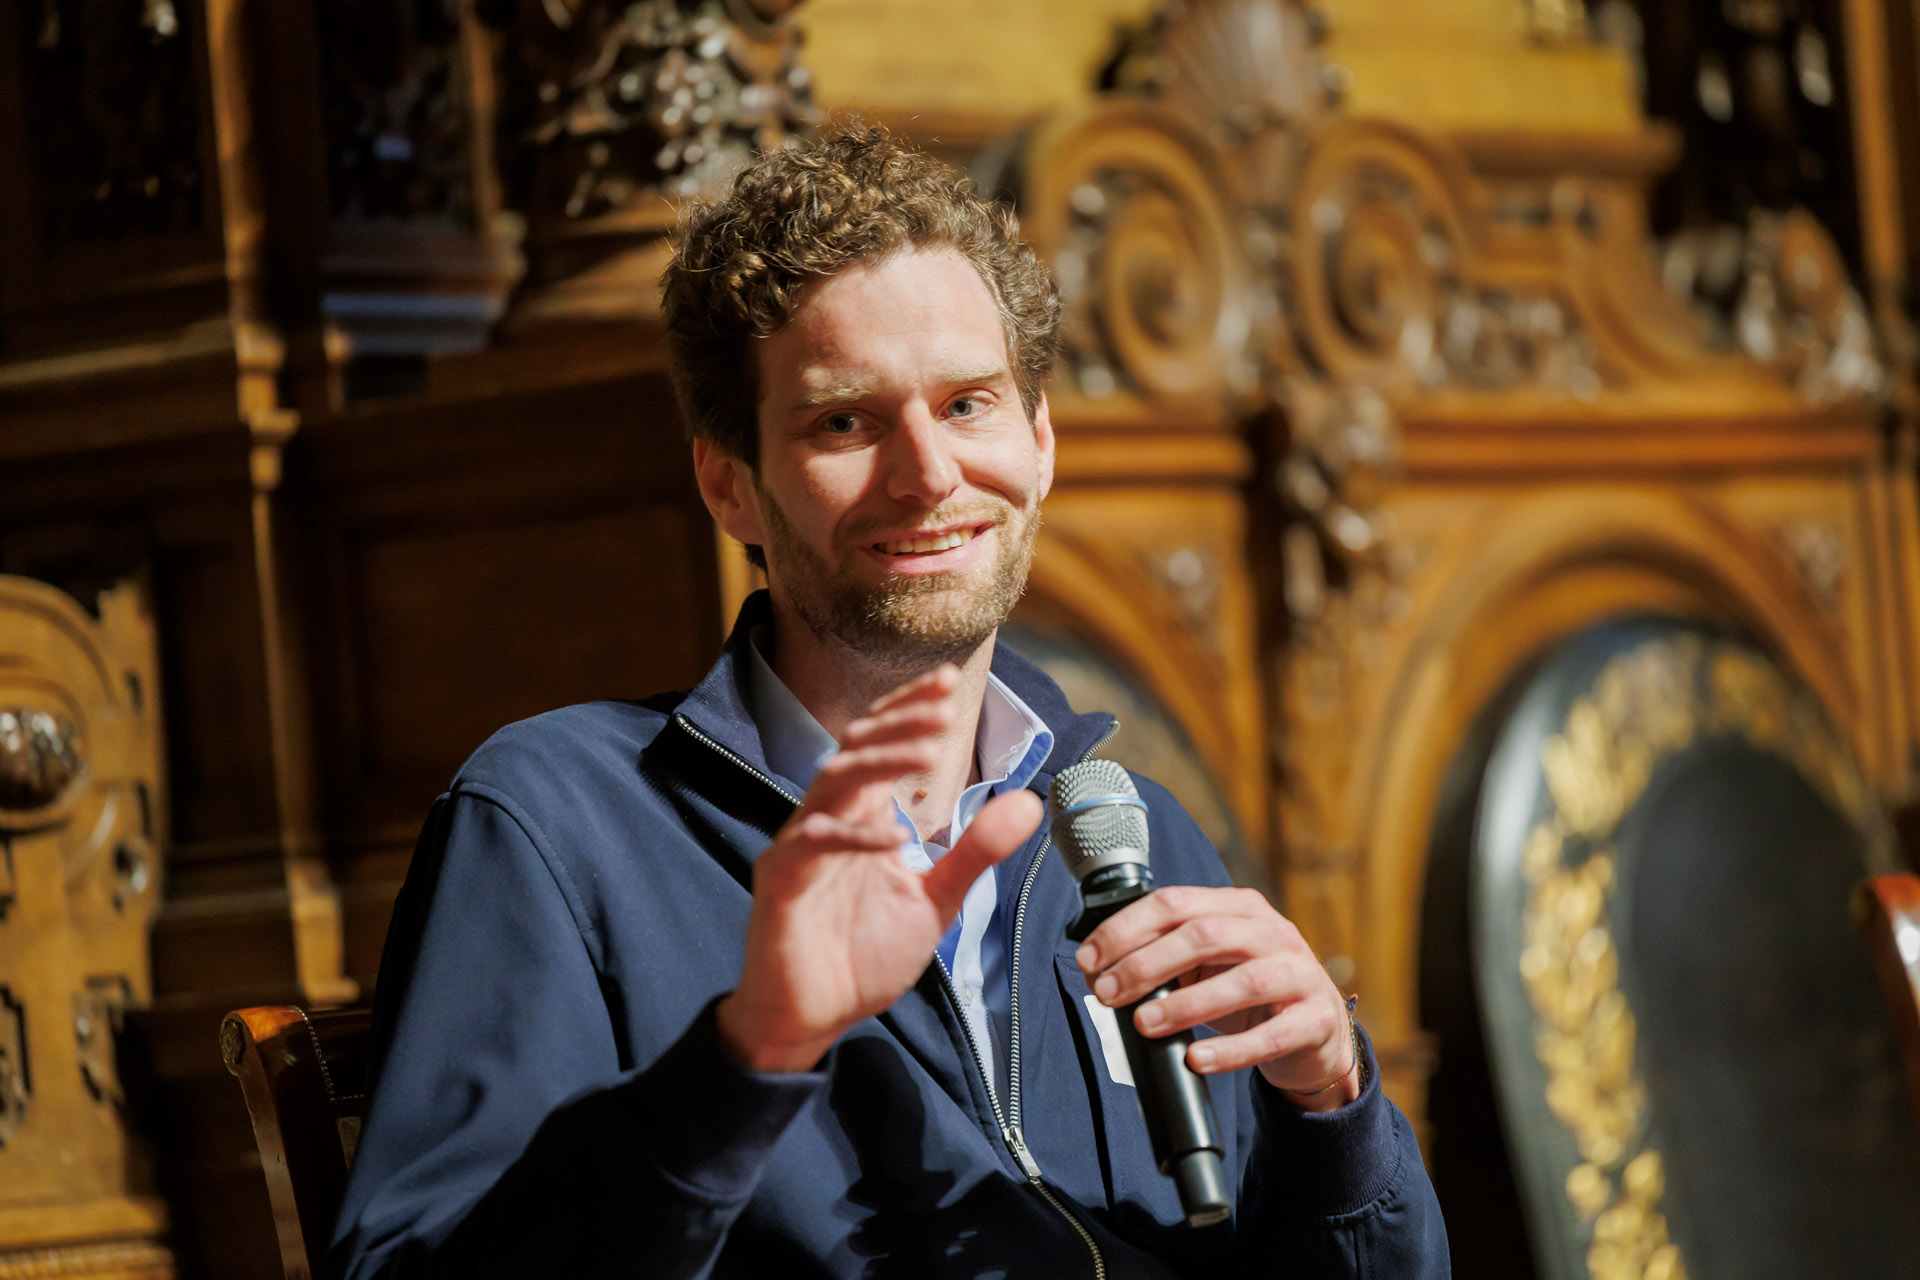 Founder & Managing Director of Bytro Labs, Tobias Kringe during the panel discussion / Photo by Marcelo Hernandez